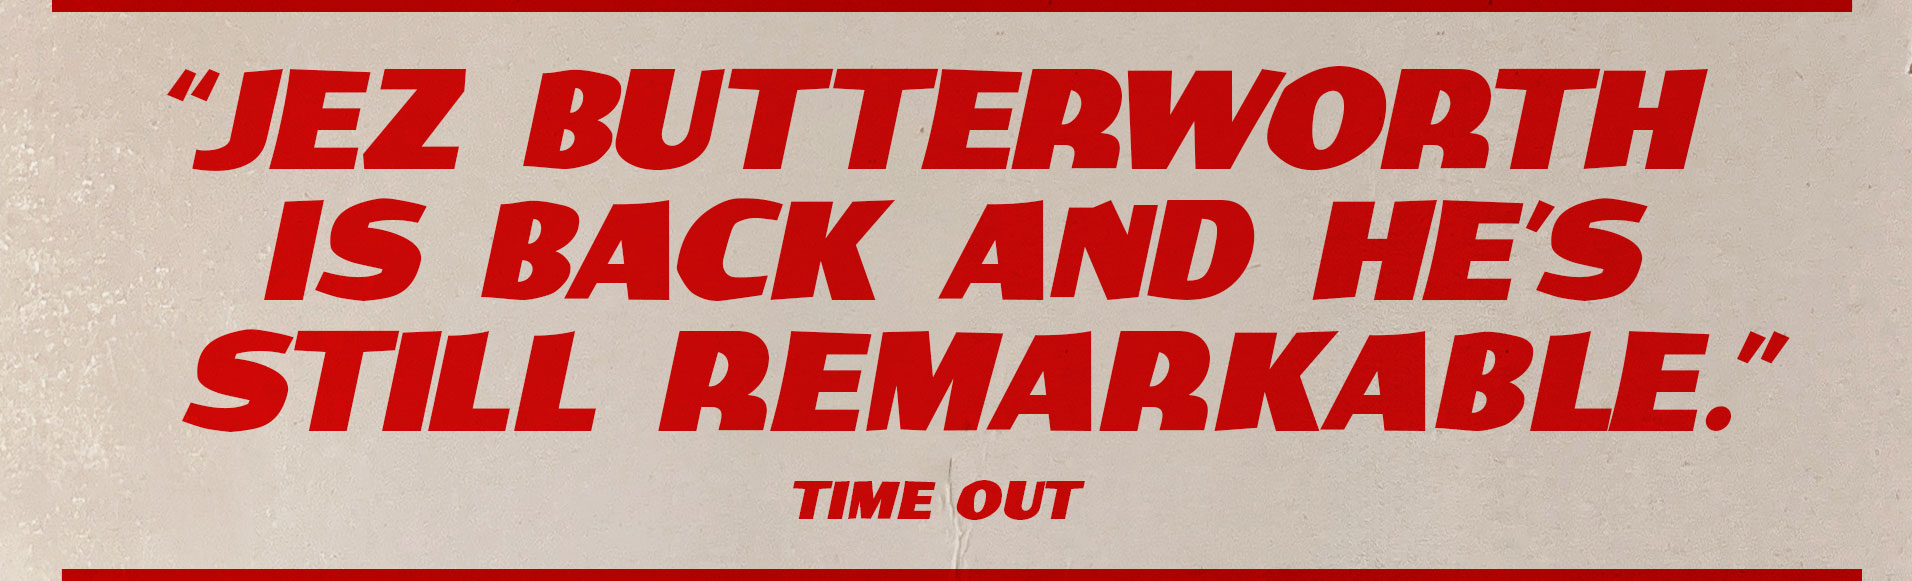 “Jez Butterworth is back, and he's still remarkable.” -TIME OUT